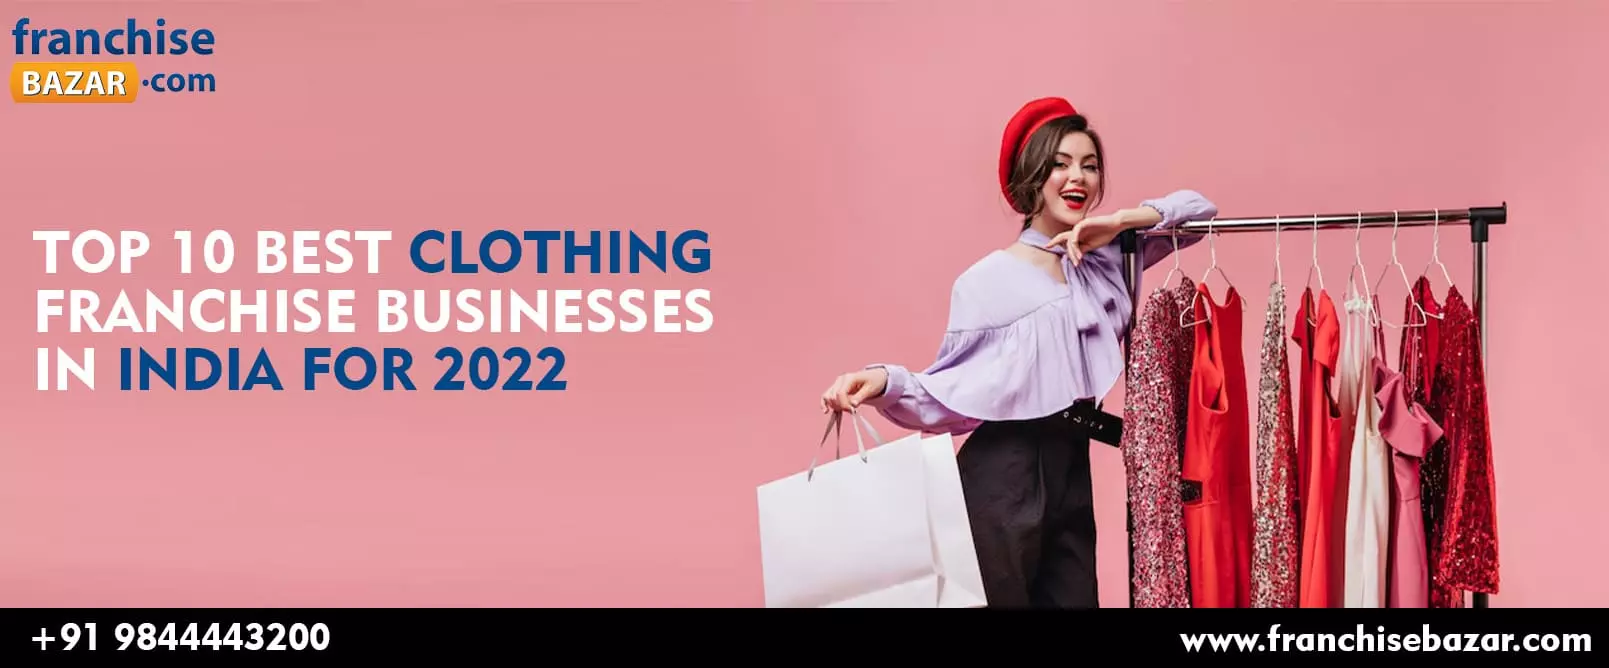 TOP 10 Best Clothing Franchise Businesses in India for 2022